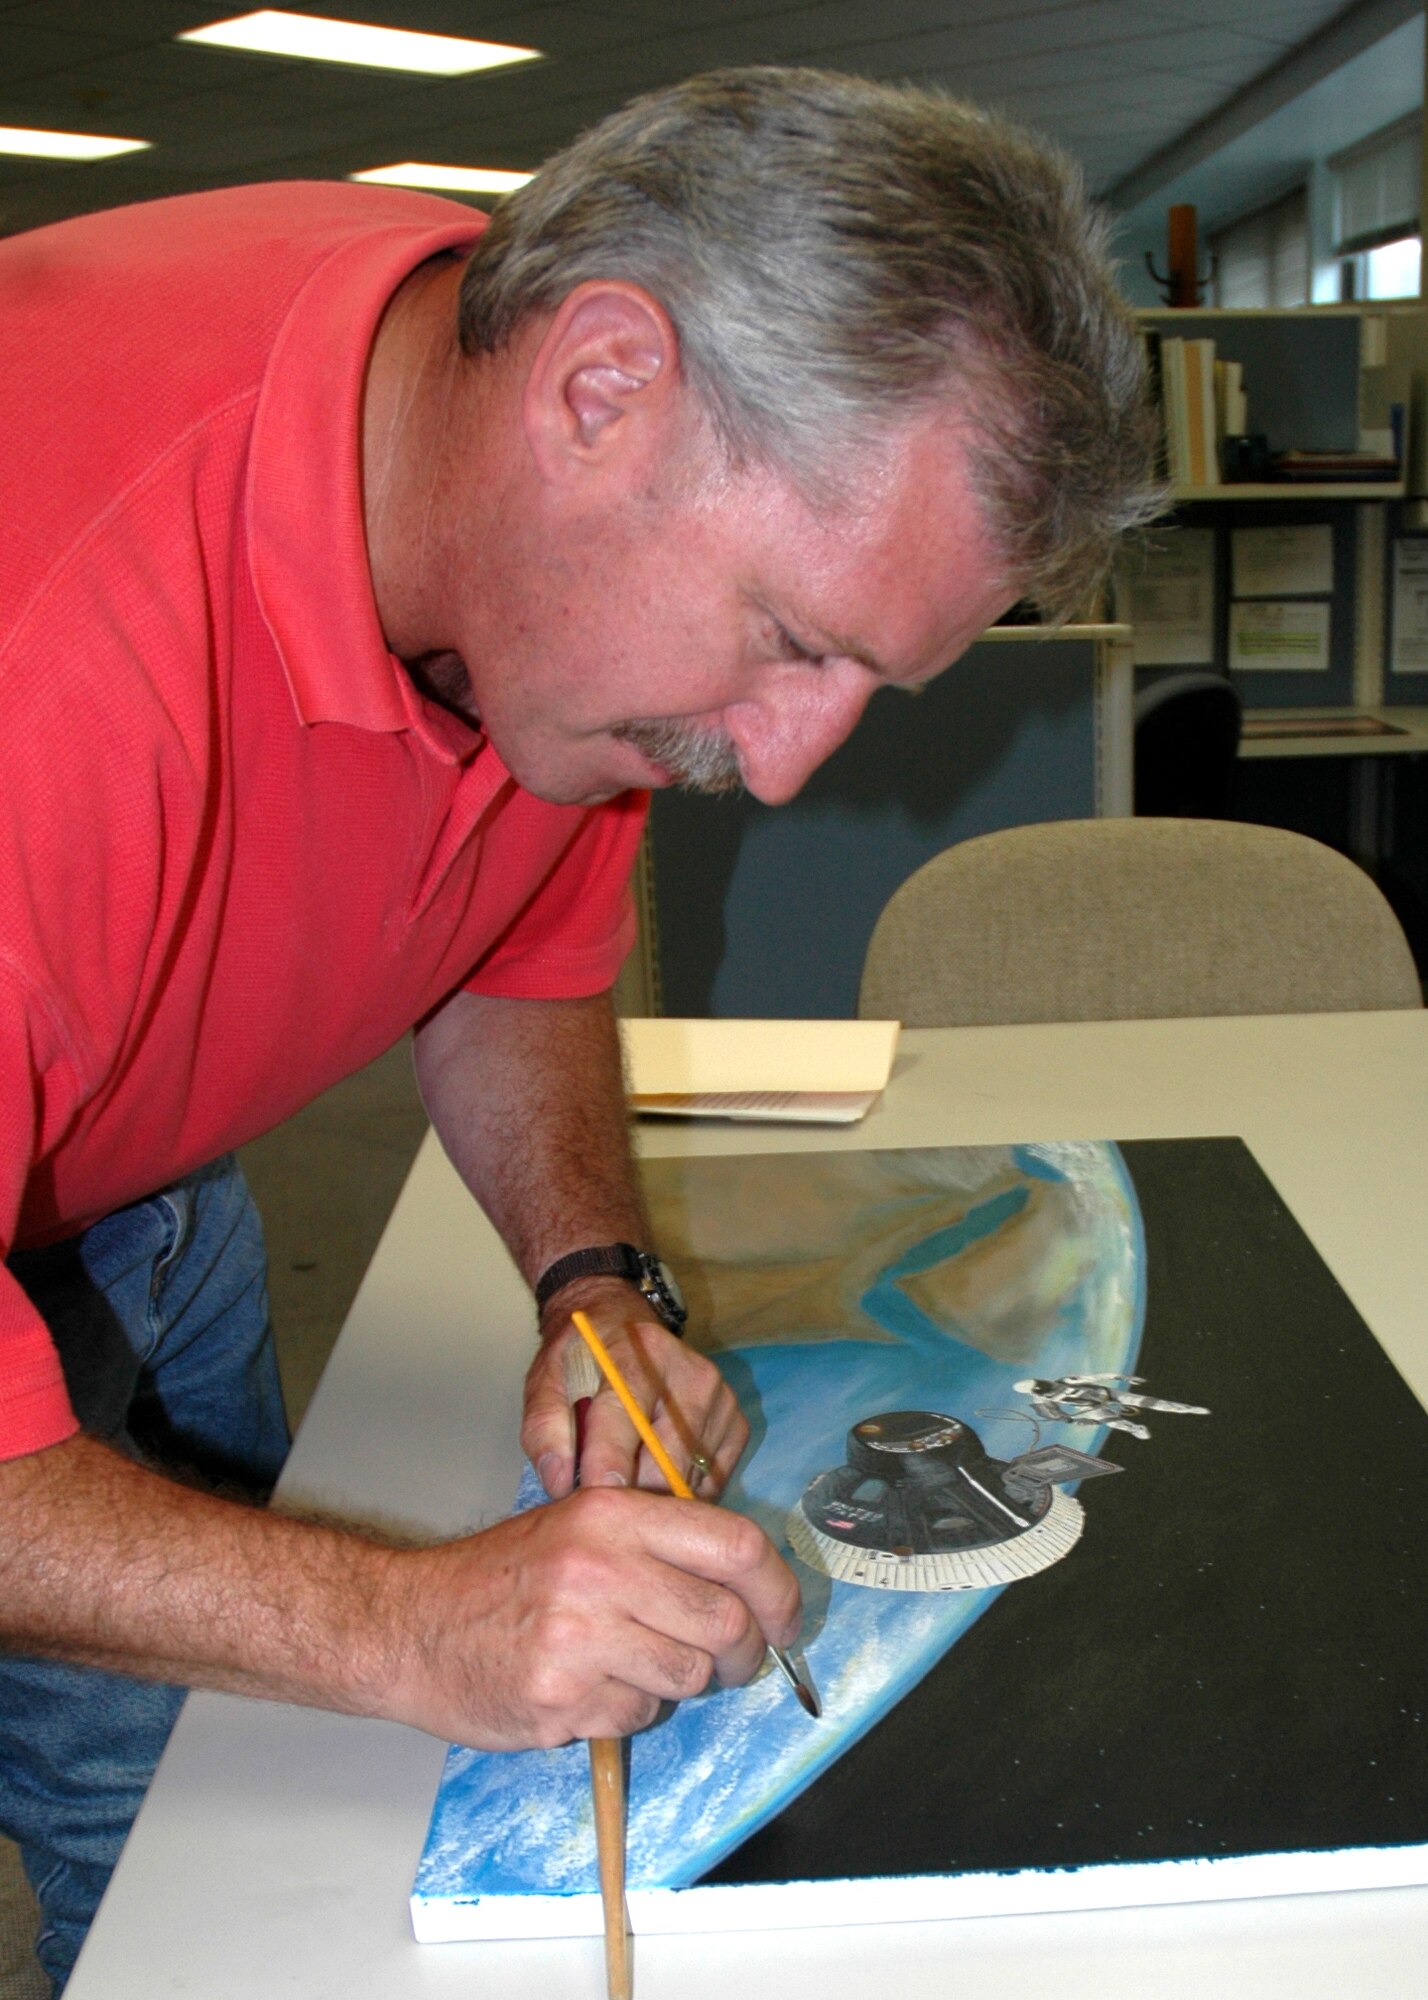 WESTOVER AIR RESERVE BASE, Mass. -- Christopher Doyle, an artist from Westover, applies the final touches to his painting of Air Force Maj. Edward H. White II conducting the first extra vehicular activity for the US manned space flight program in June 1965. Mr. Doyle chose this historical event as part of the 60th anniversary of the Air Force. He is also a senior master sergeant with the Air Force Reserve’s 439th Maintenance Squadron at Westover. He attended the anniversary celebration and ribbon-cutting at the Pentagon Oct. 19. Mr. Doyle's painting will be displayed in Washington, D.C. through this next year. (U.S. Air Force photo by Tech. Sgt. Andrew Biscoe)